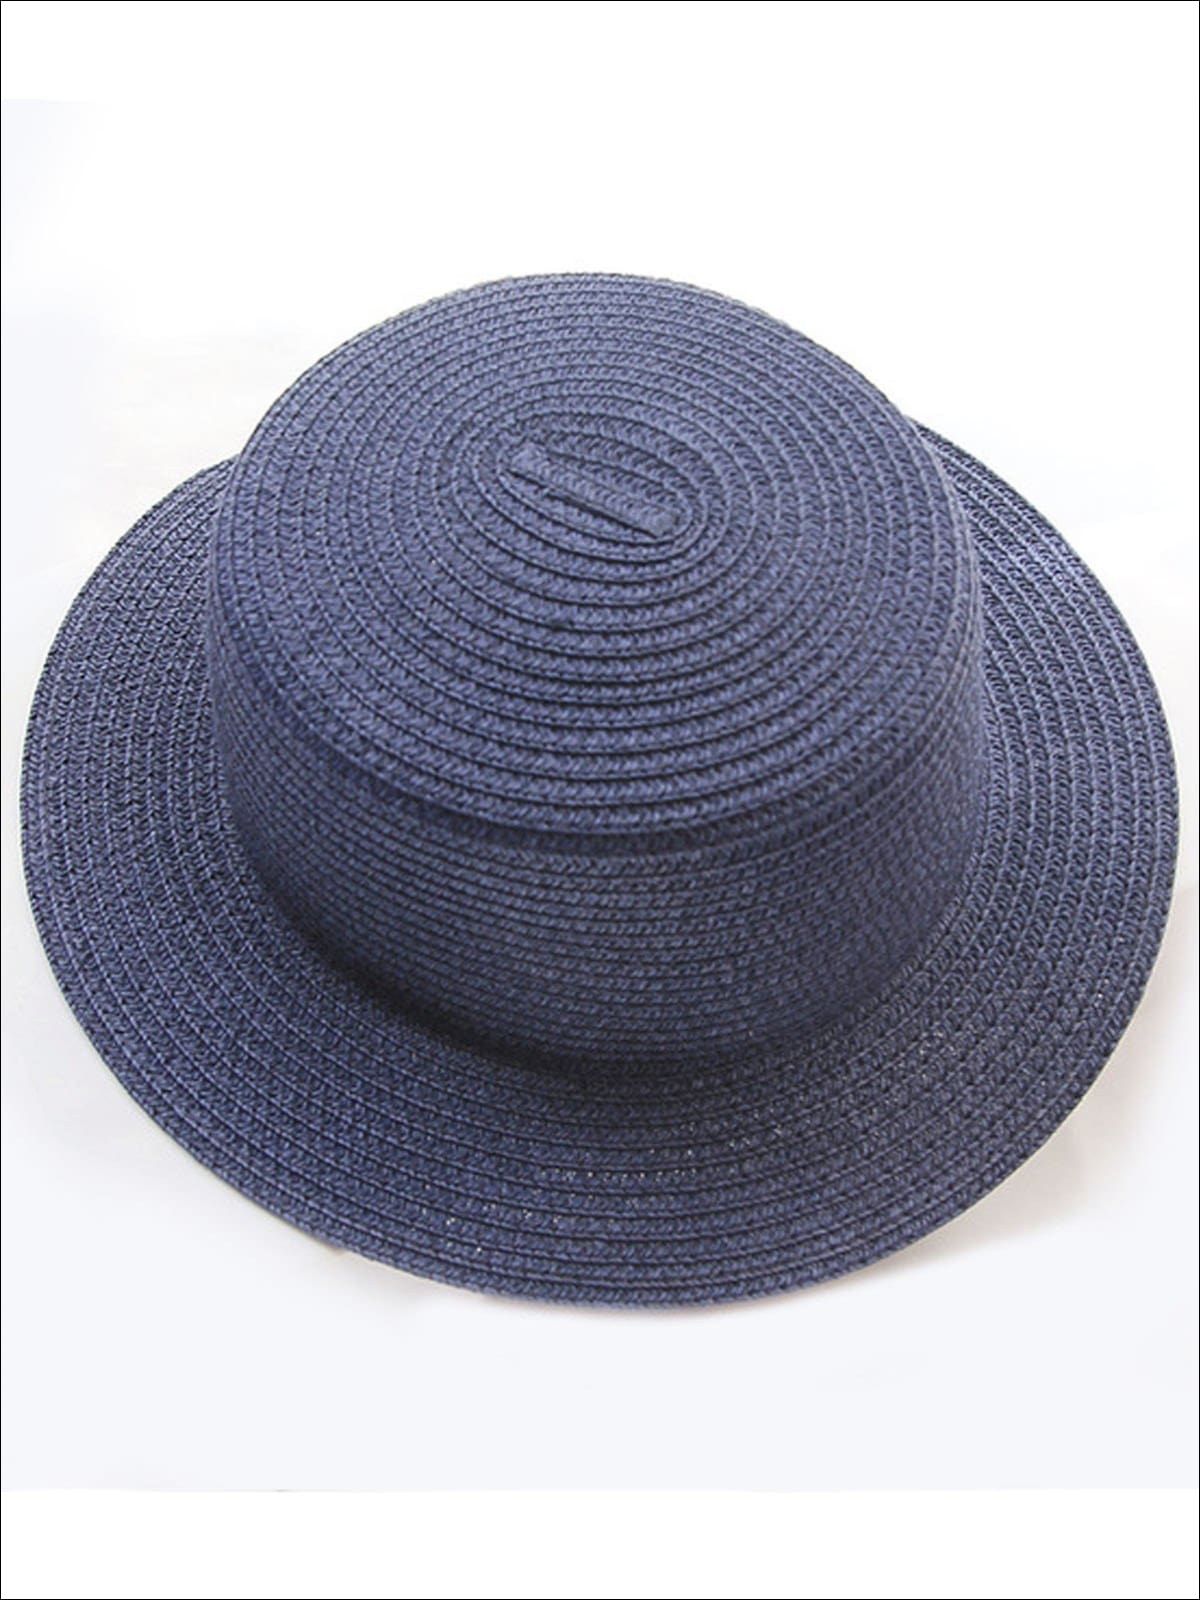 Girls Solid Color Straw Sun Hat - Navy / Kids-One Size - Mommy & Me Accessories